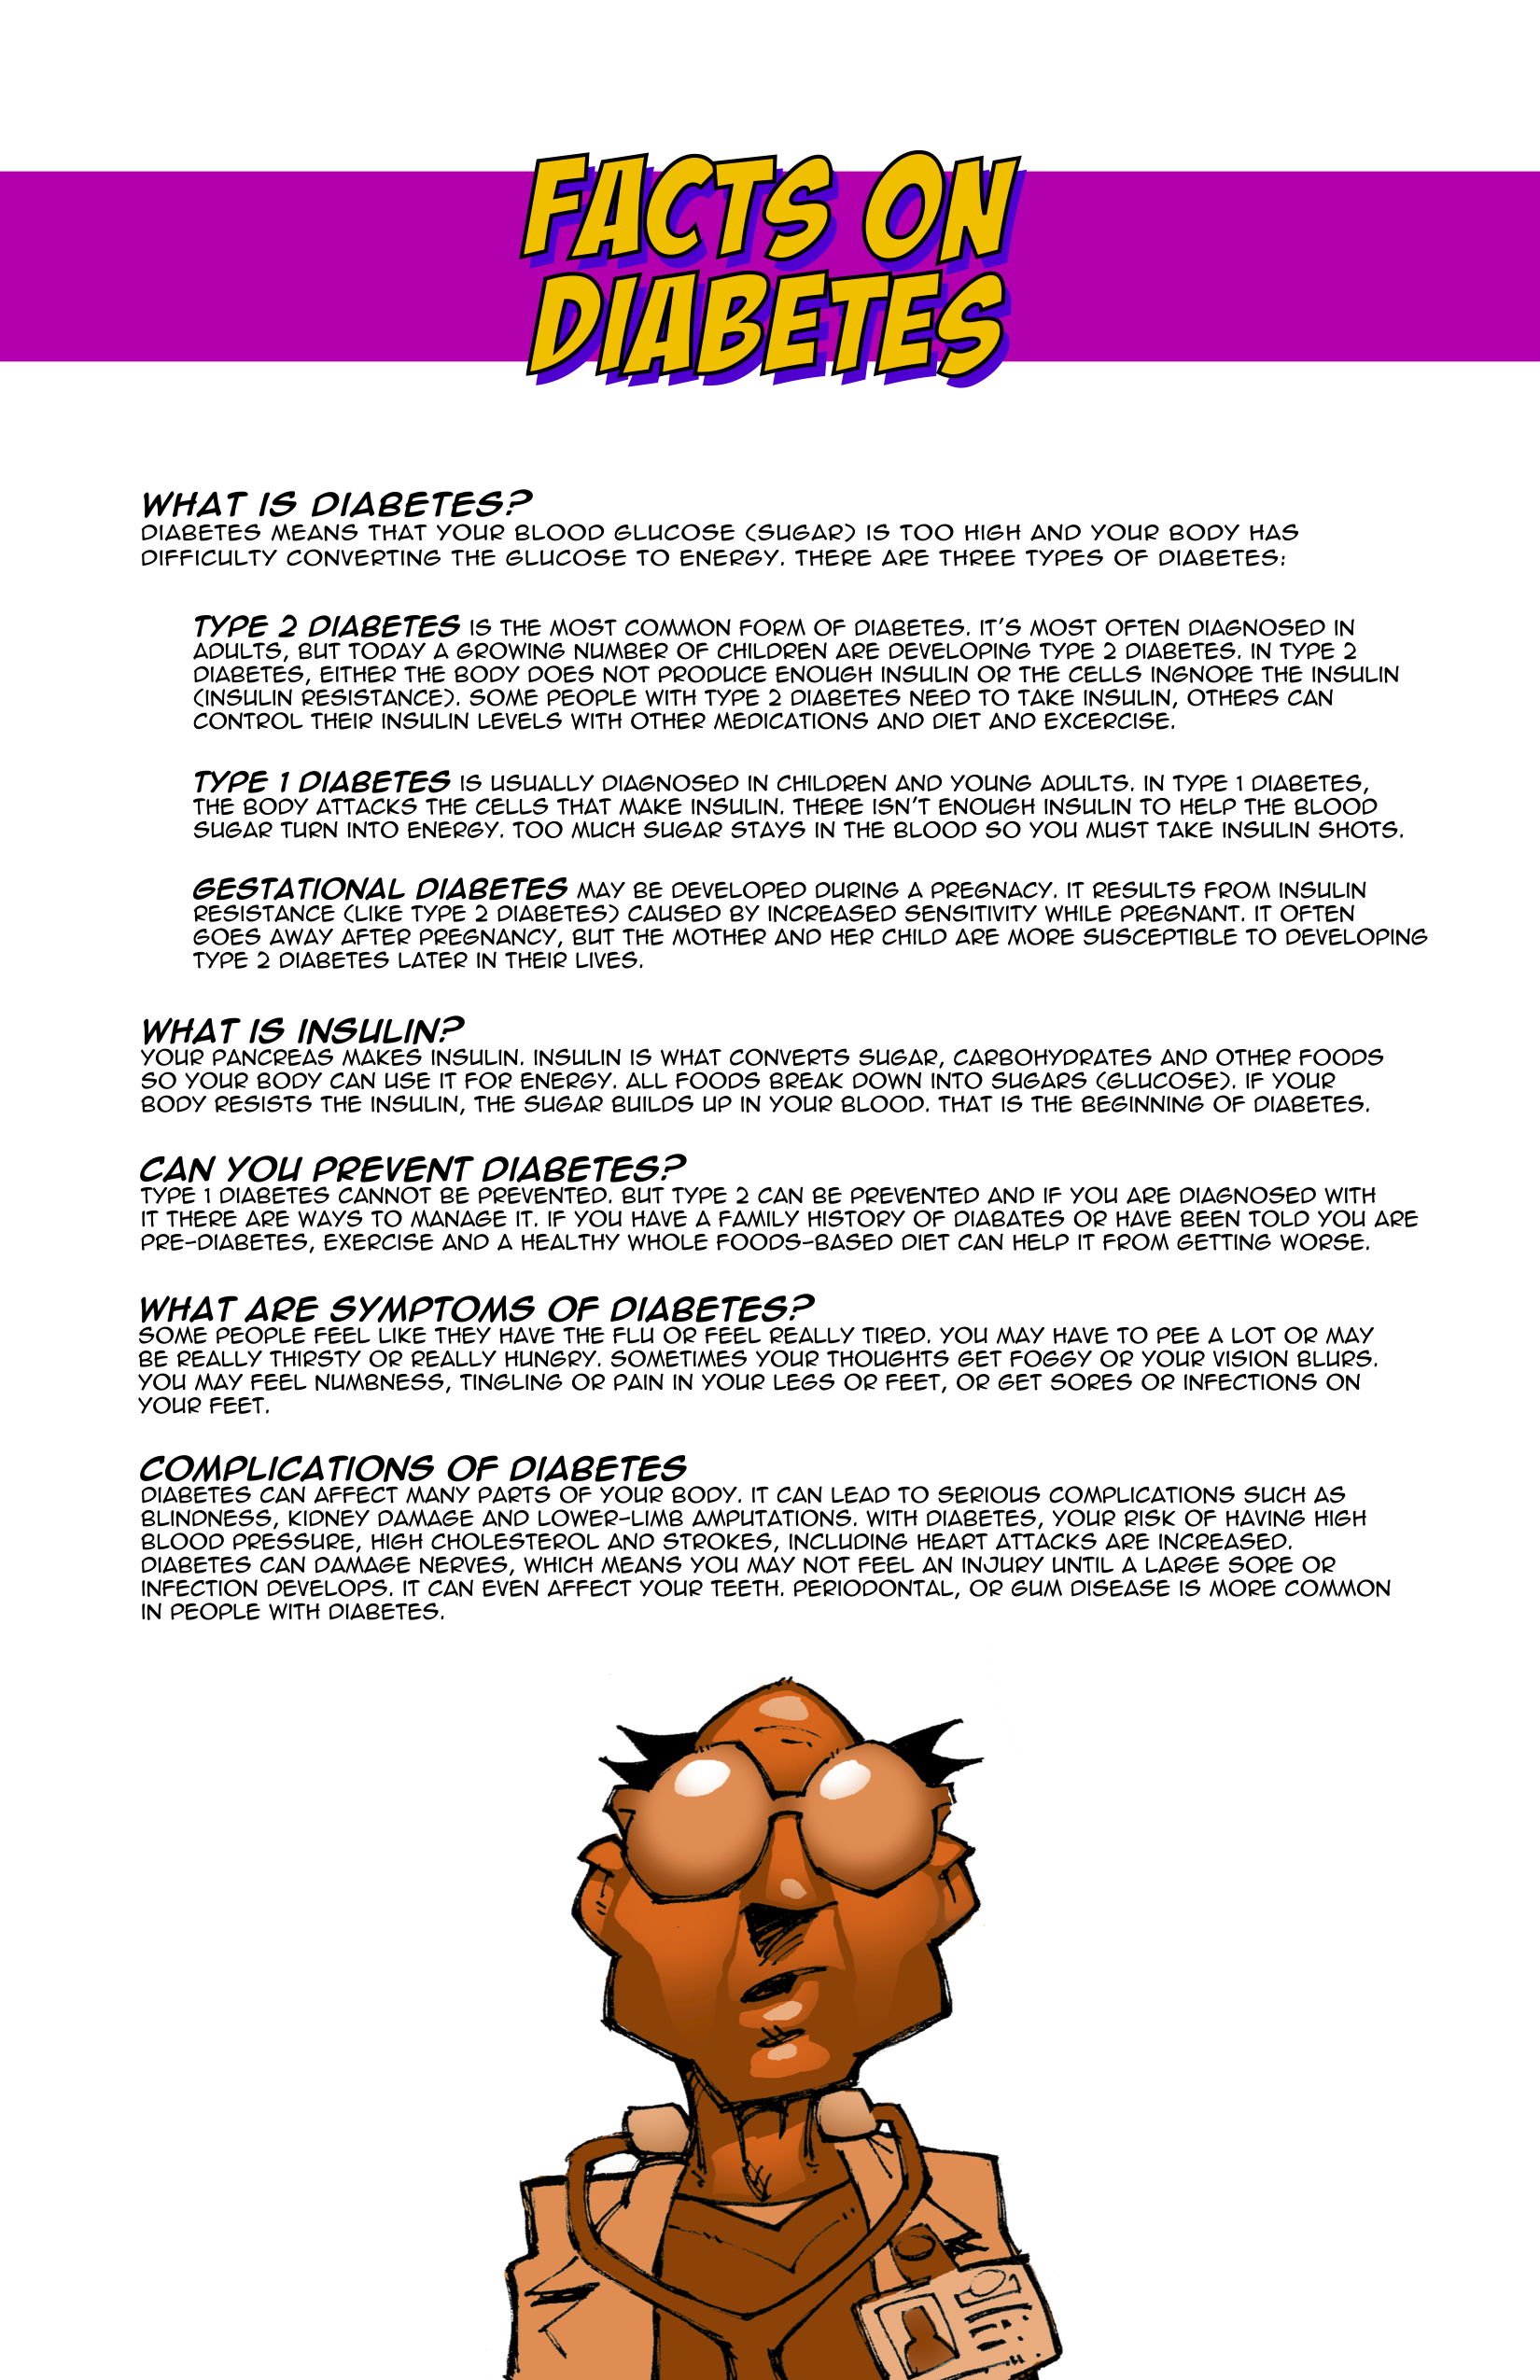 Page 23. This page is a fact sheet on diabetes.